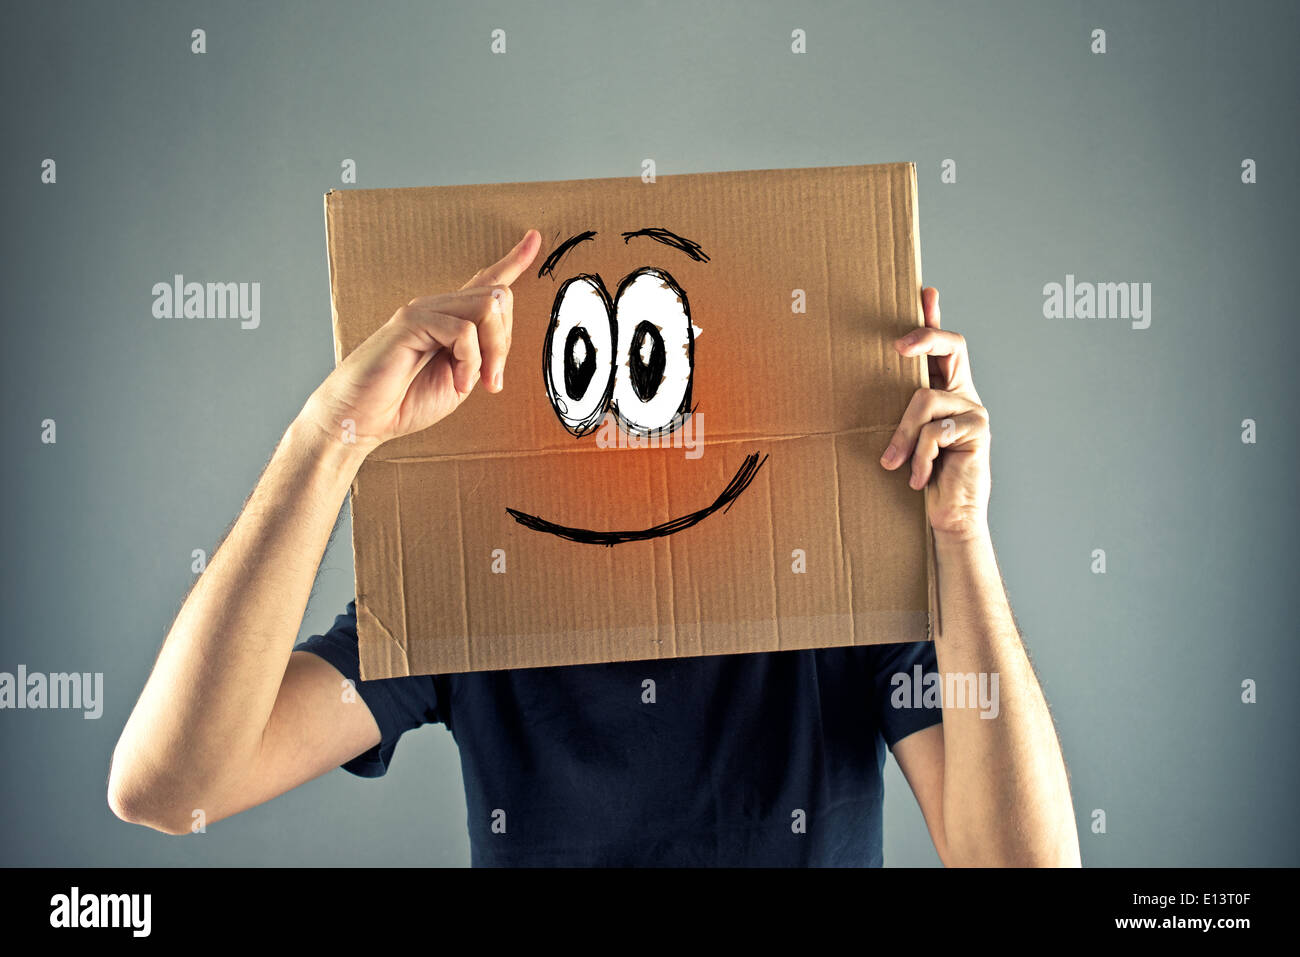 Man with cardboard box on his head with happy face expression just realized something. Stock Photo